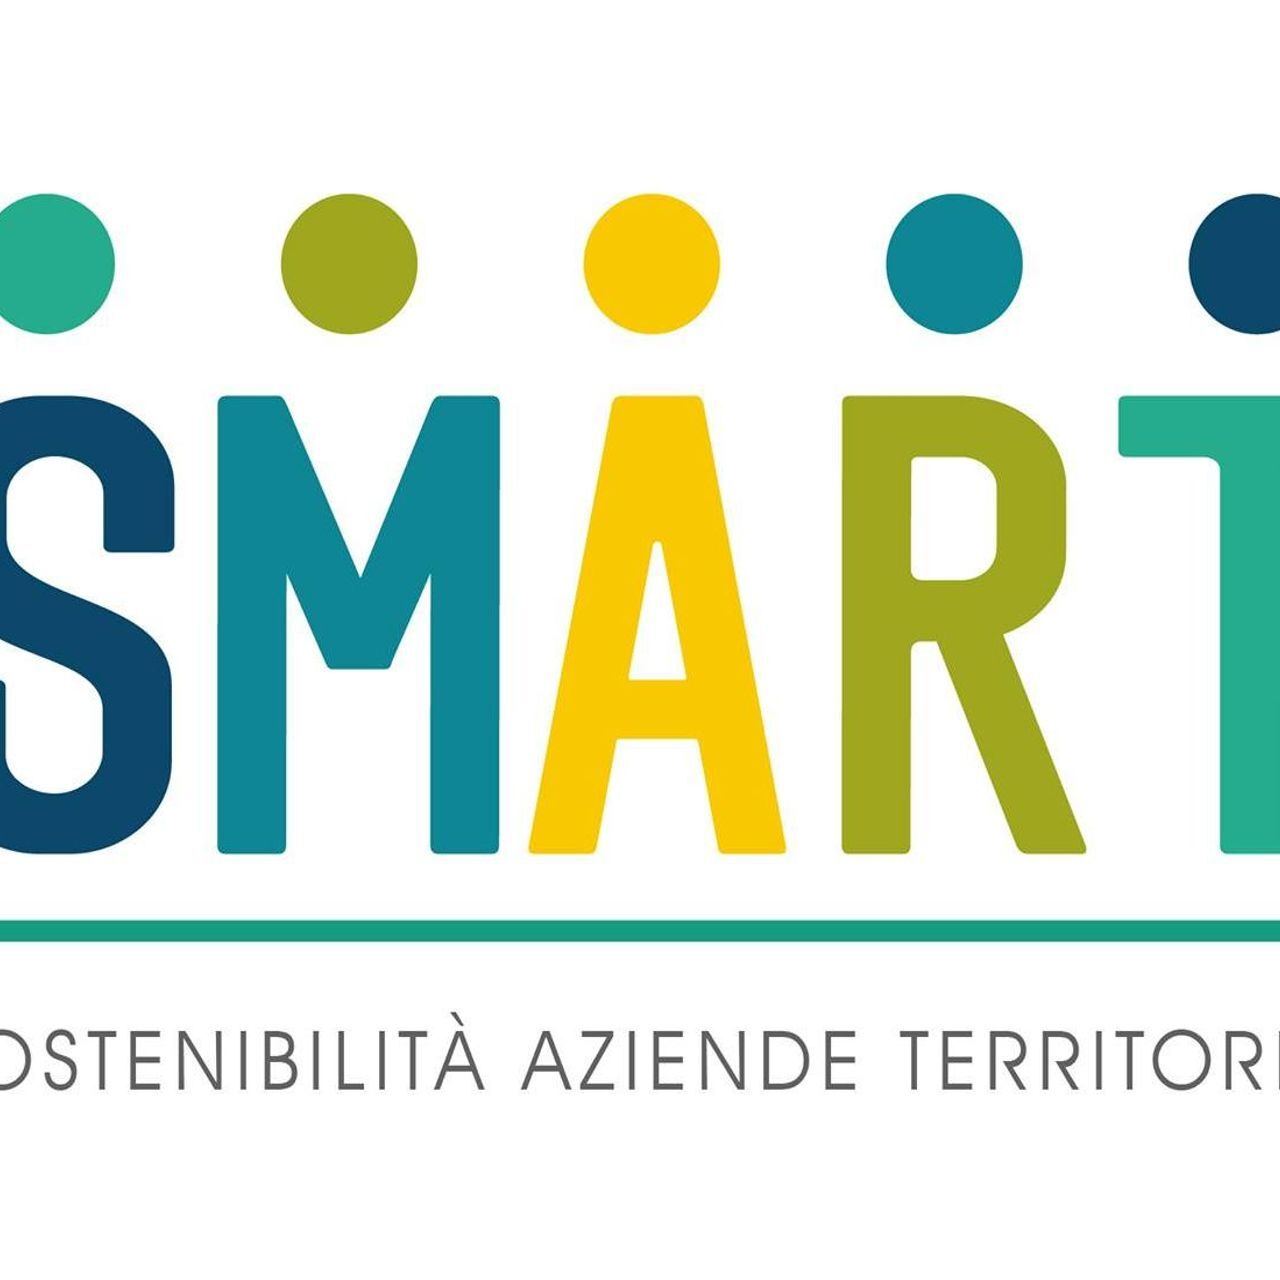 Sigla proiectului SMART (Sustainable Strategies and Responsible Business Models in the Cross-Border Territory)